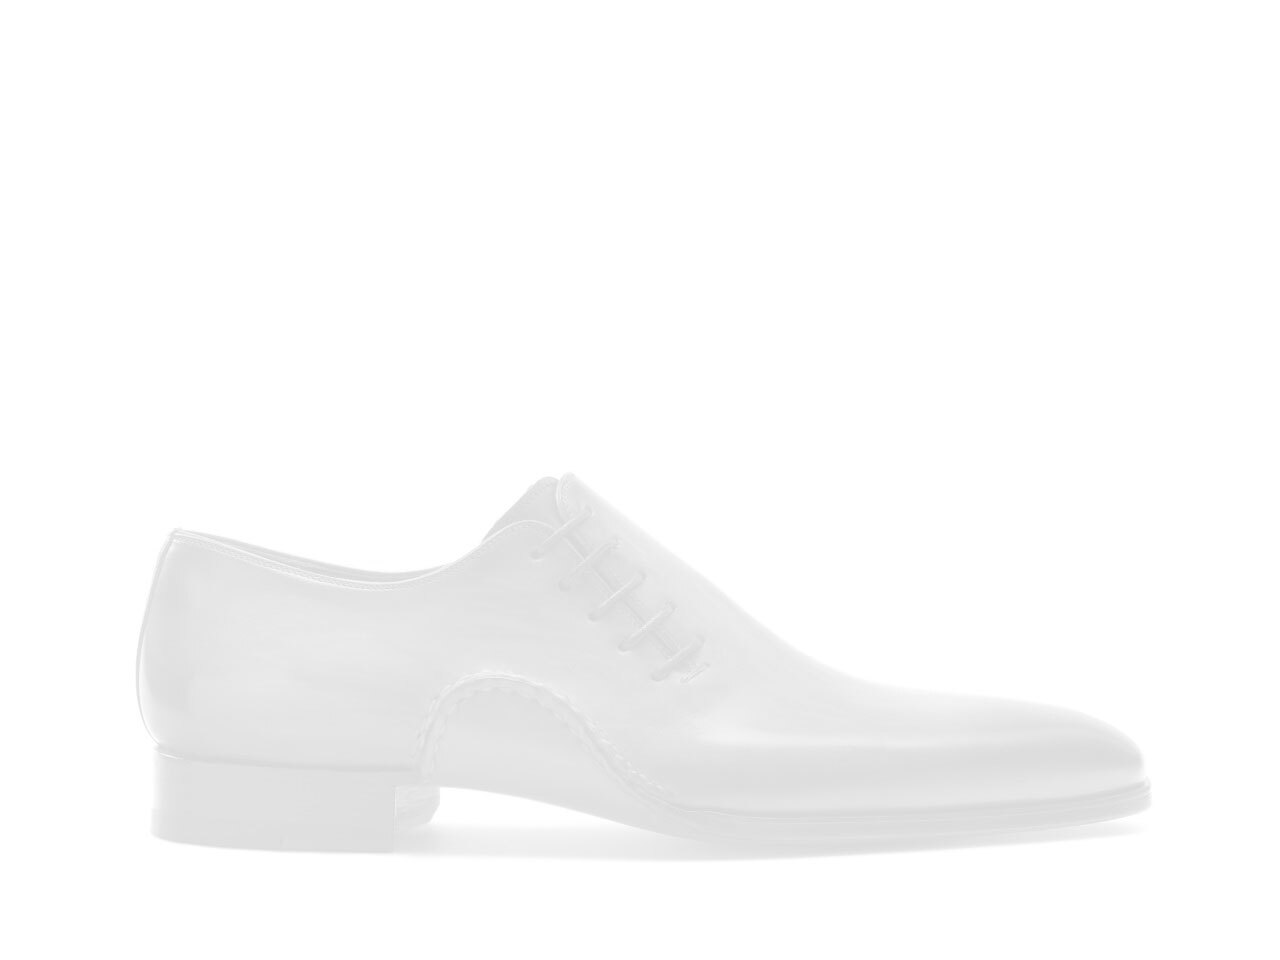 magnanni high top sneakers